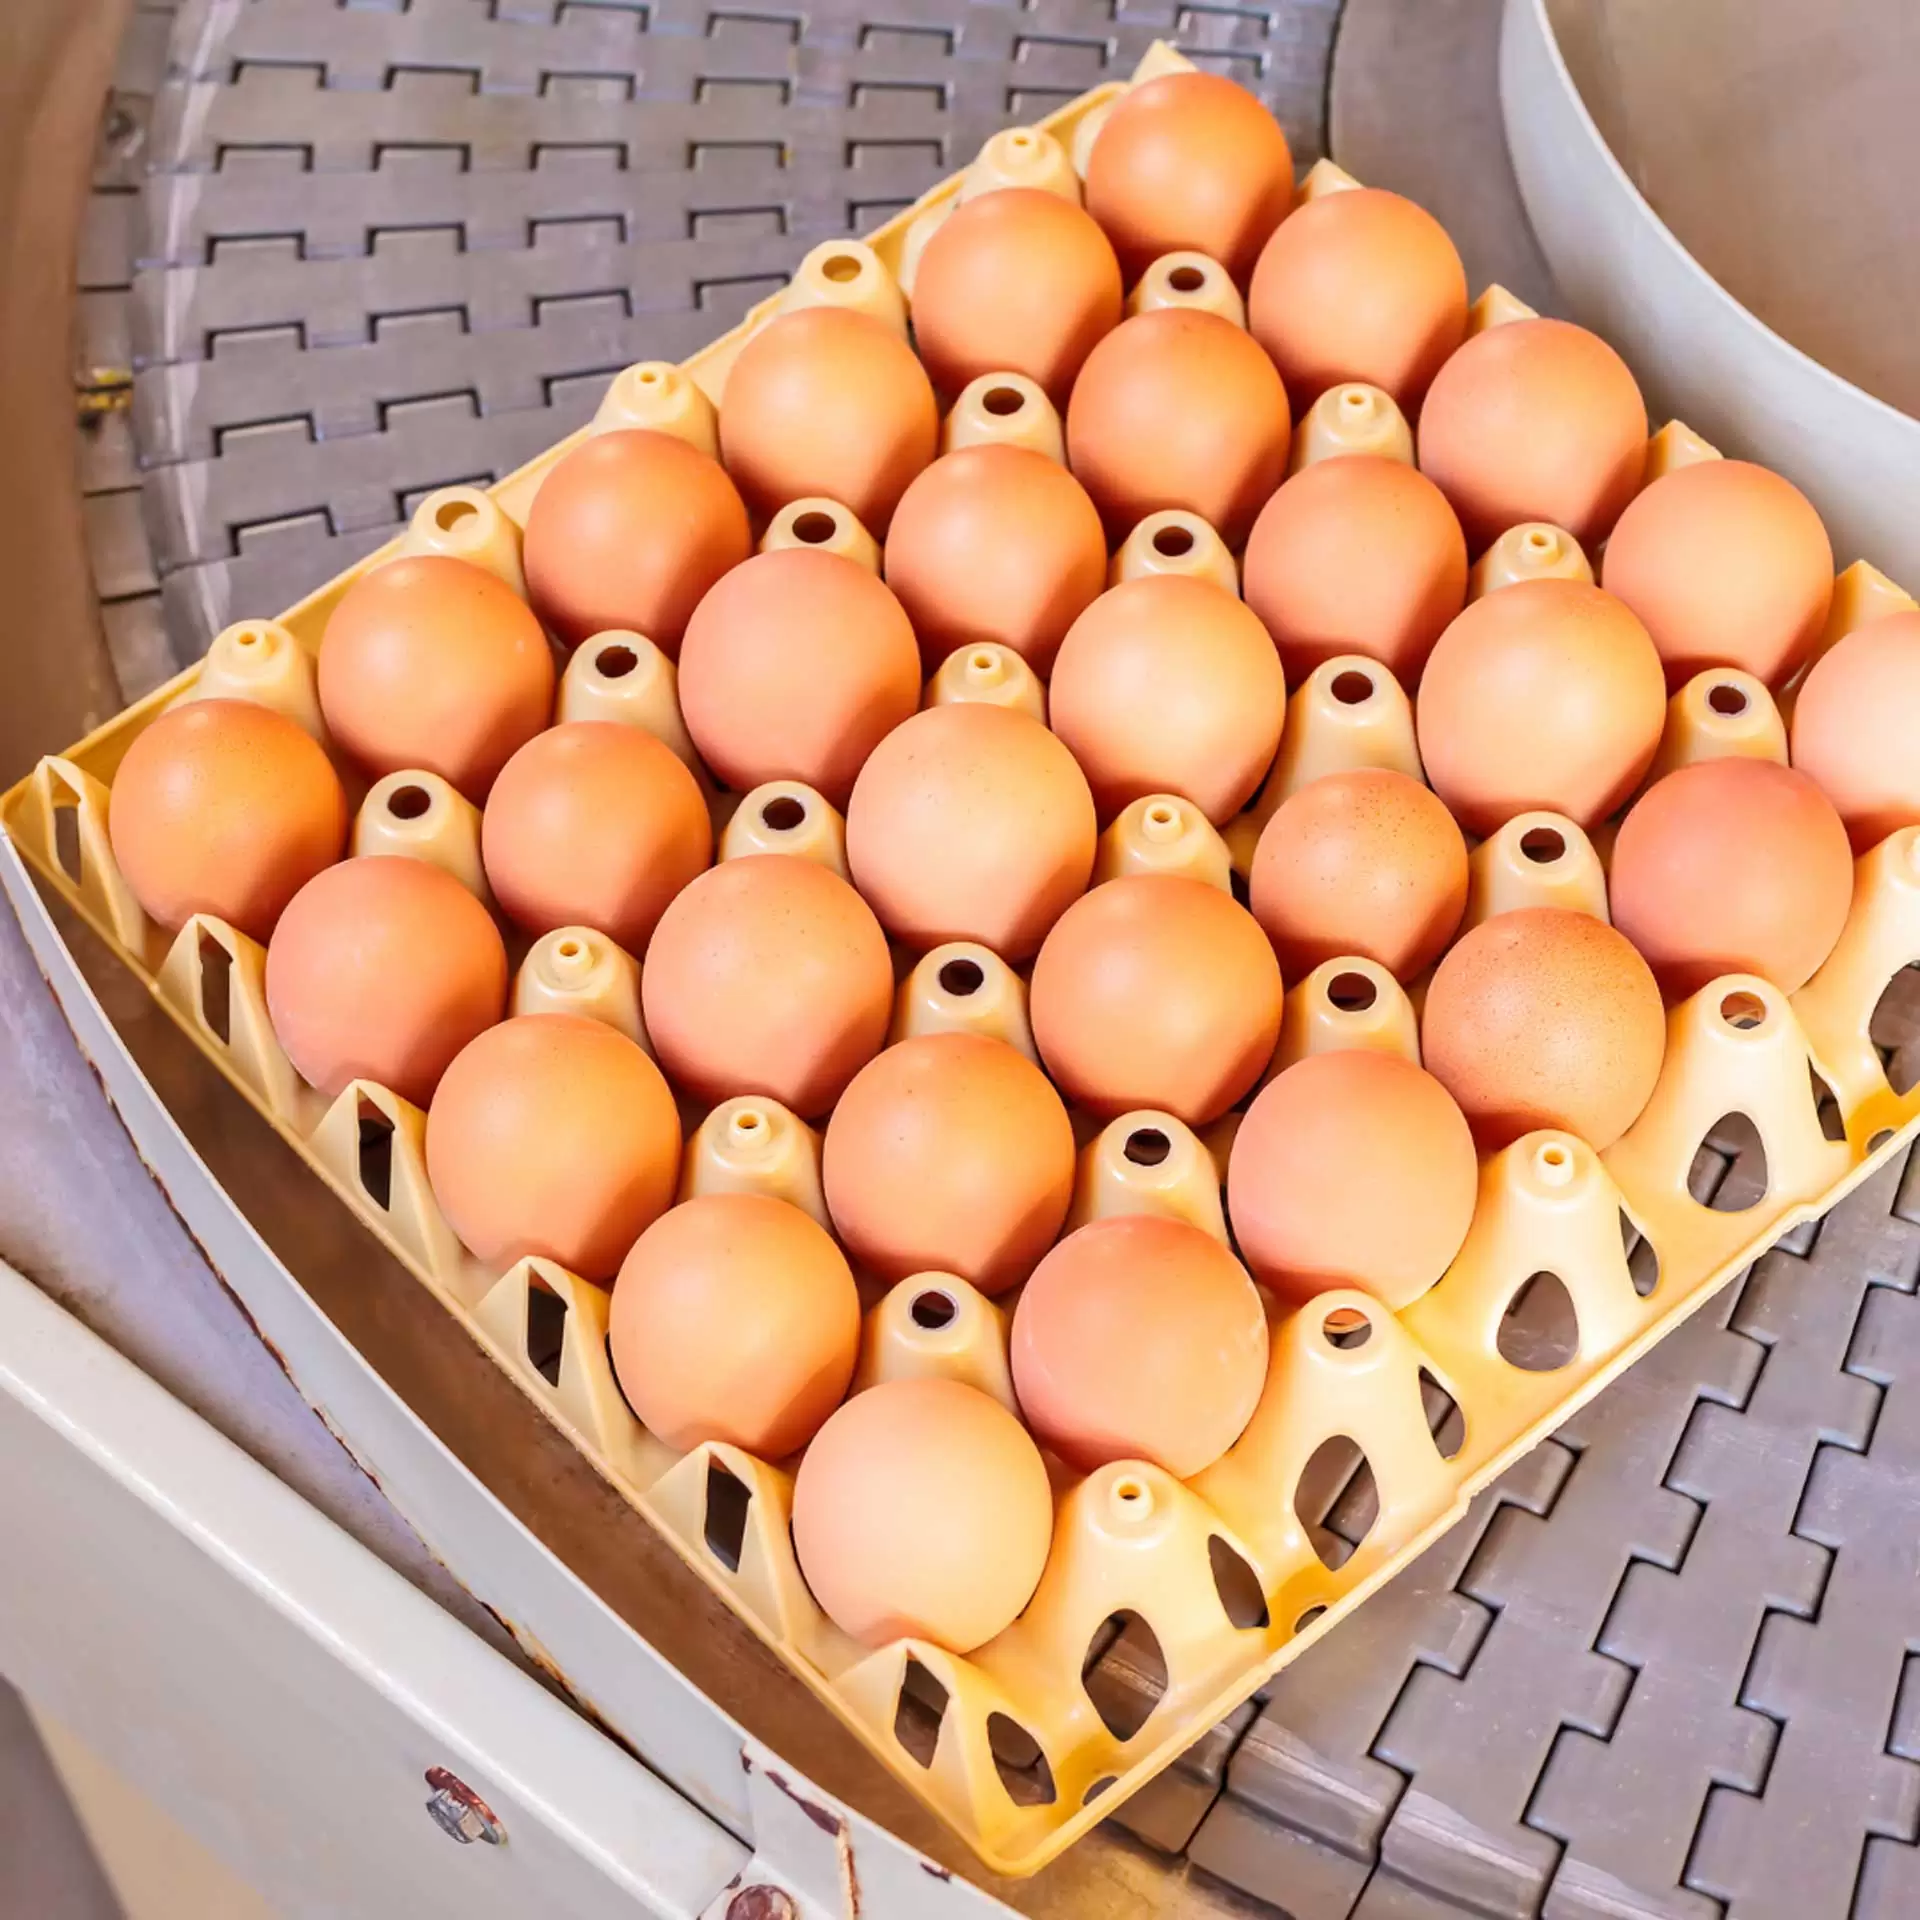 Egg Processing Machines and Hygiene